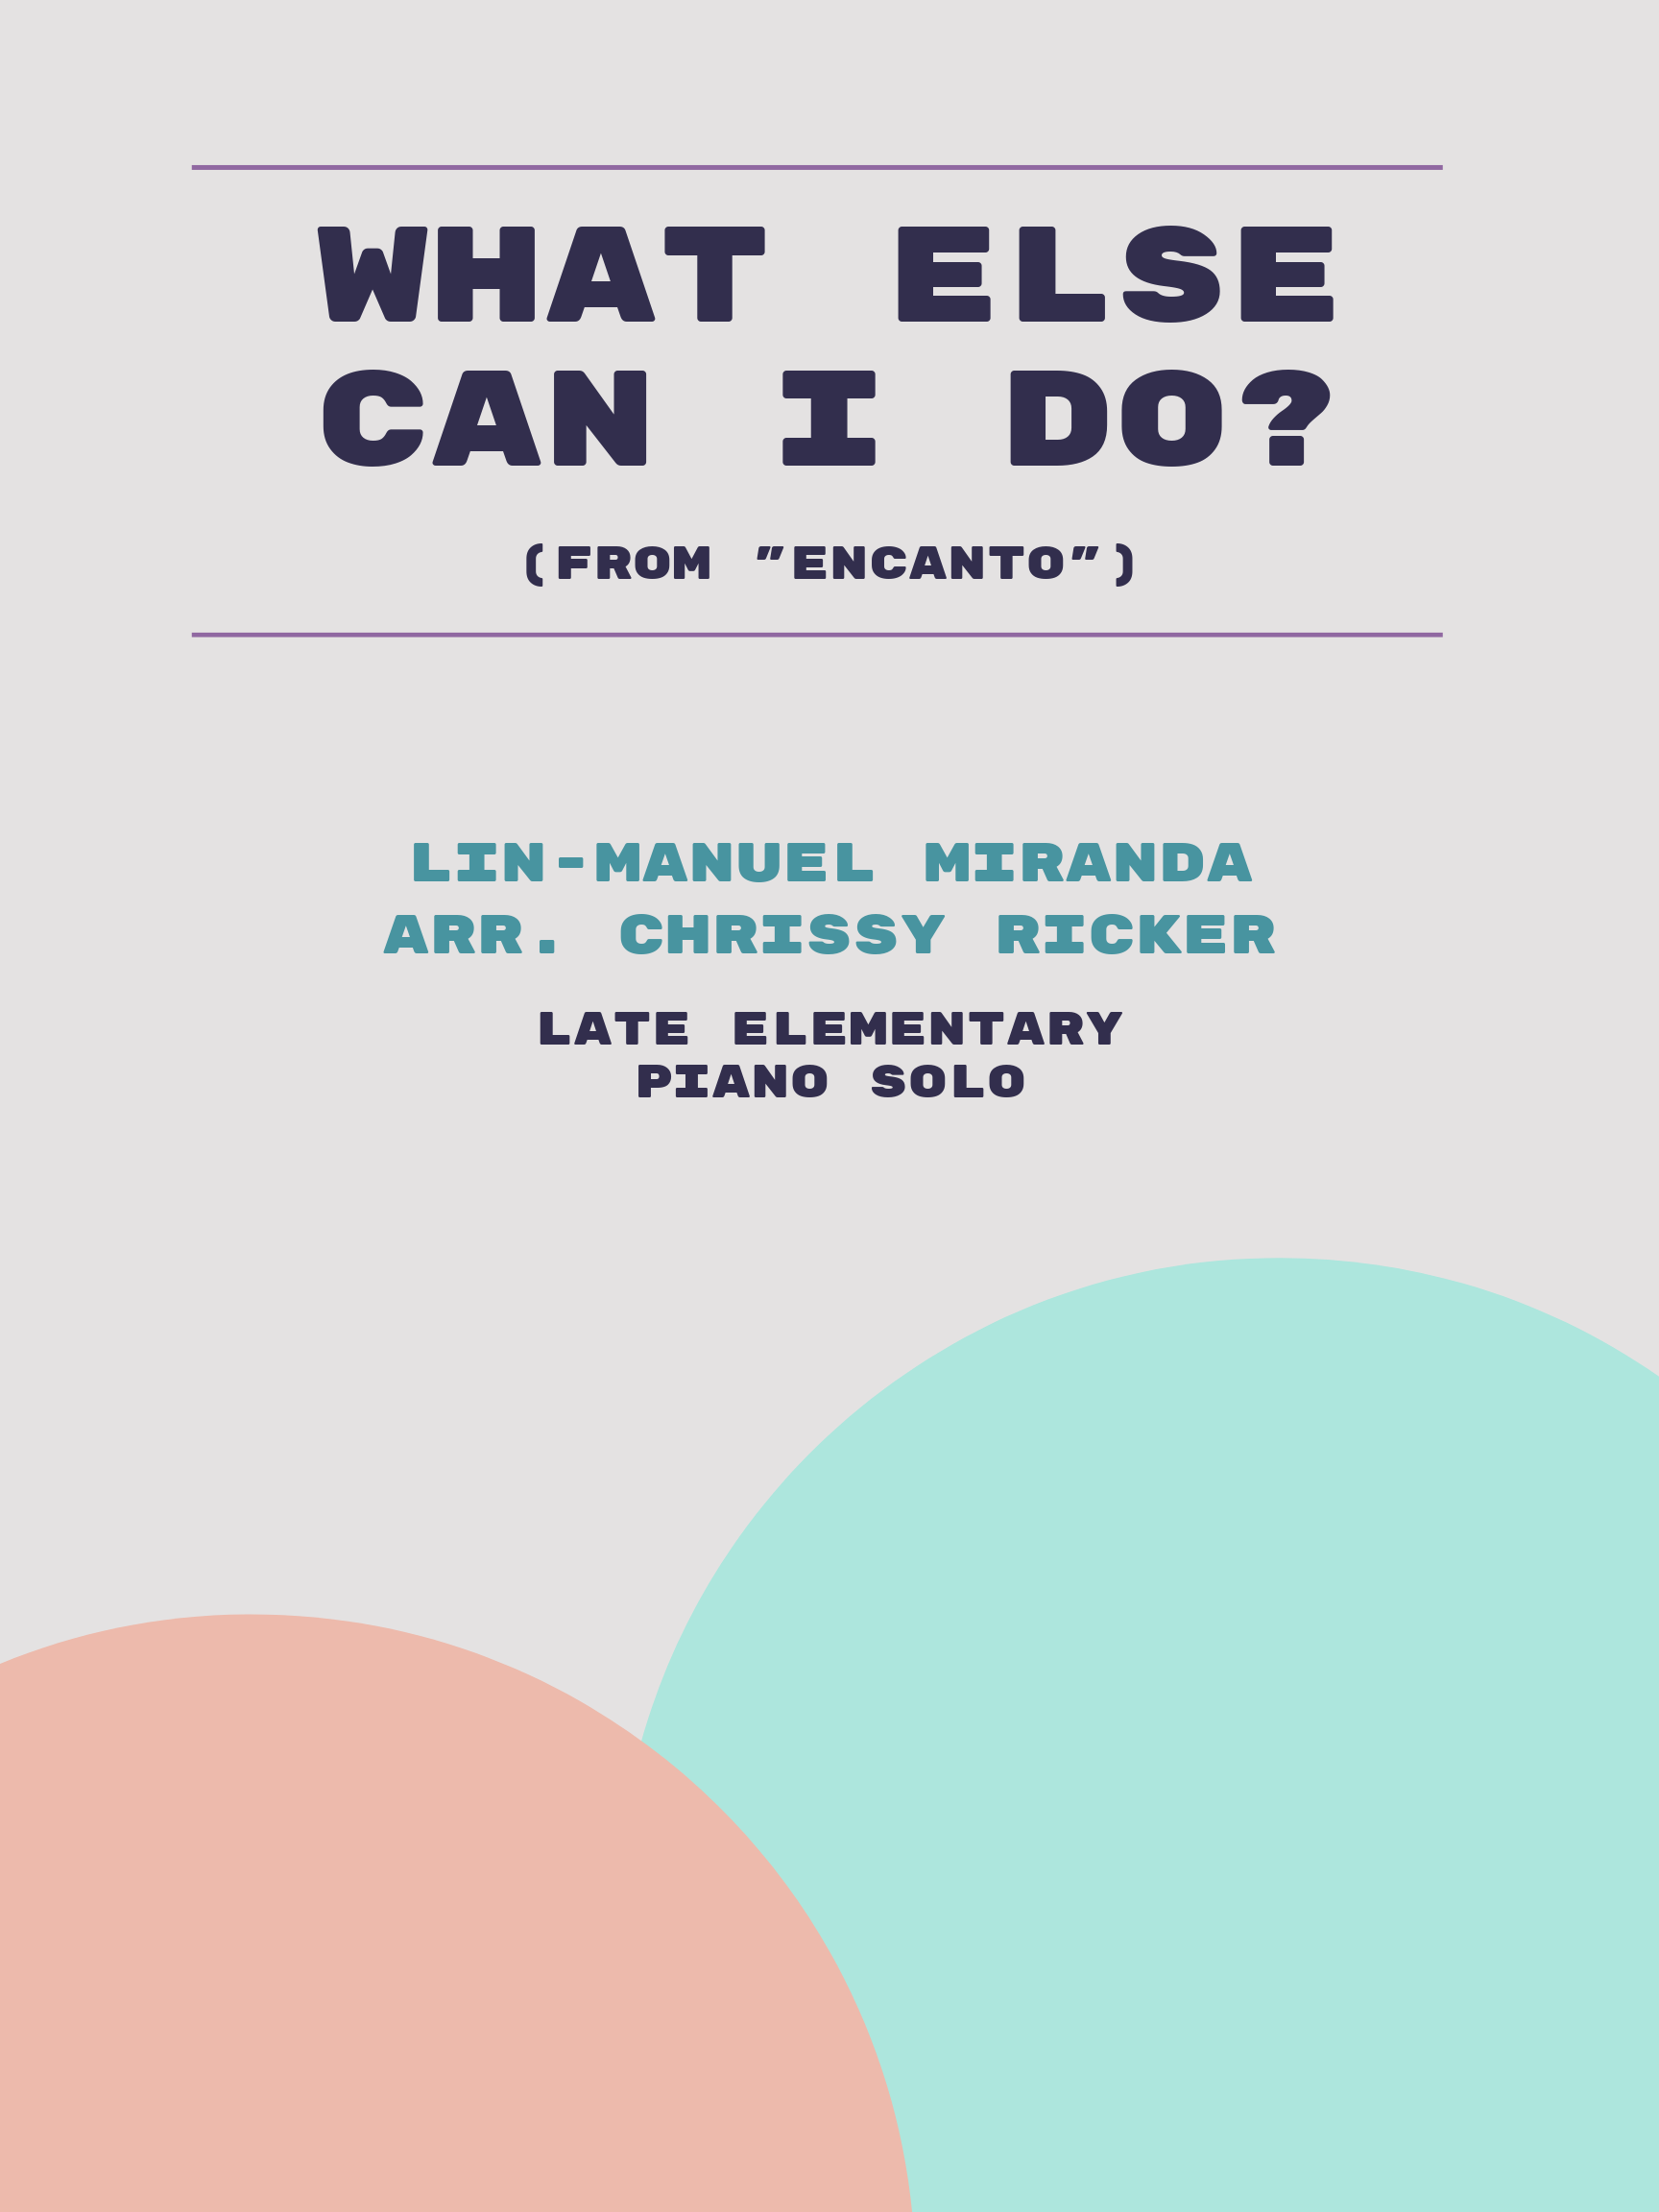 What Else Can I Do? by Lin-Manuel Miranda